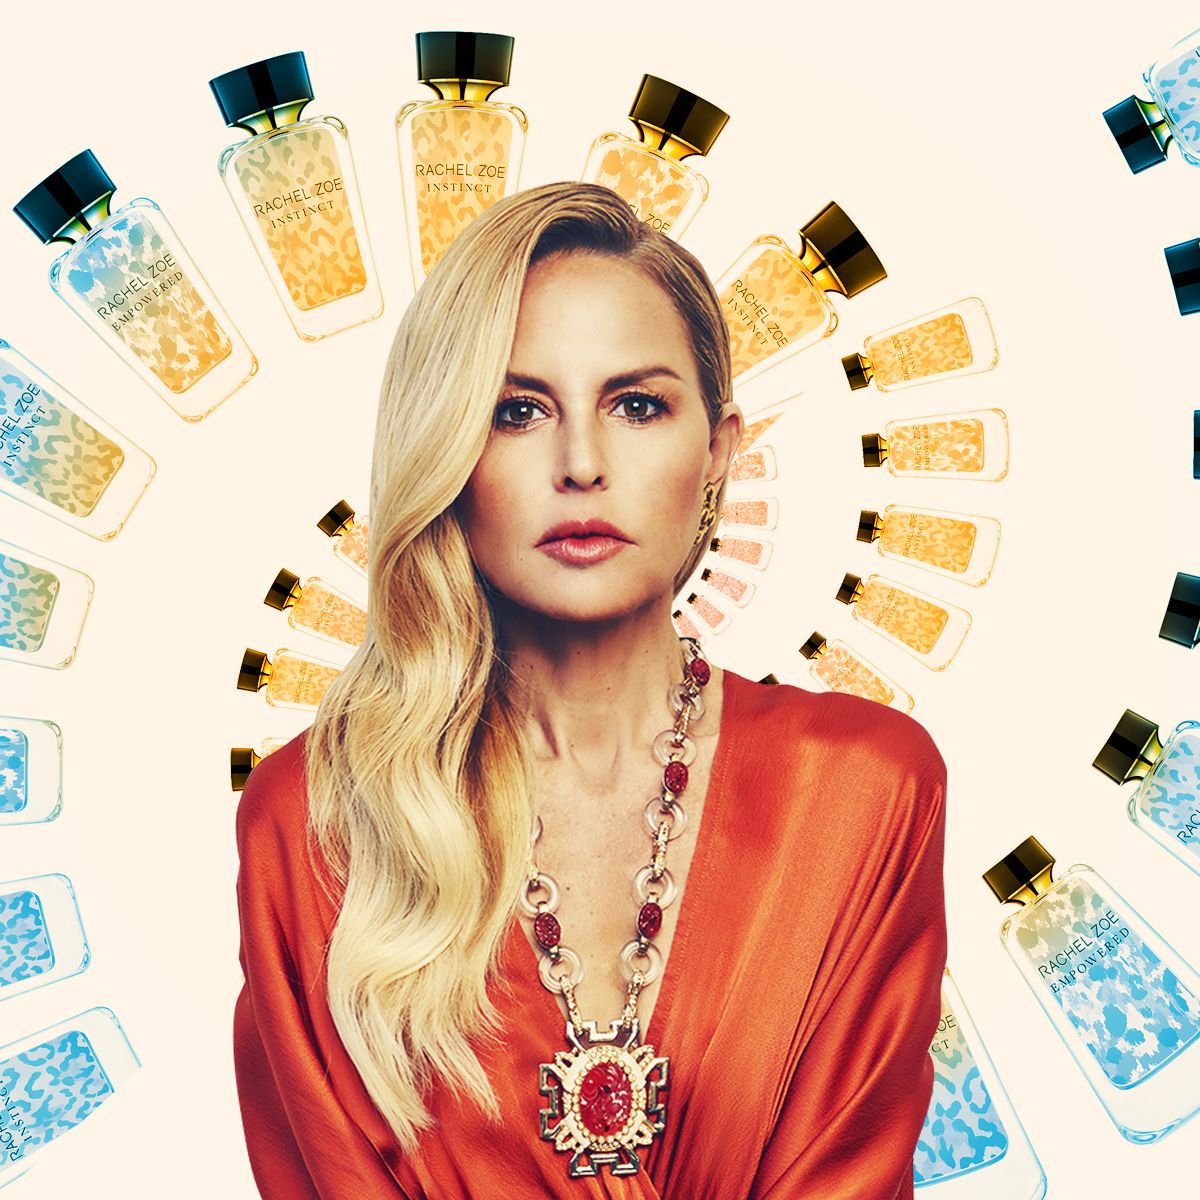 Stylist Rachel Zoe on Her First Fragrance Collection